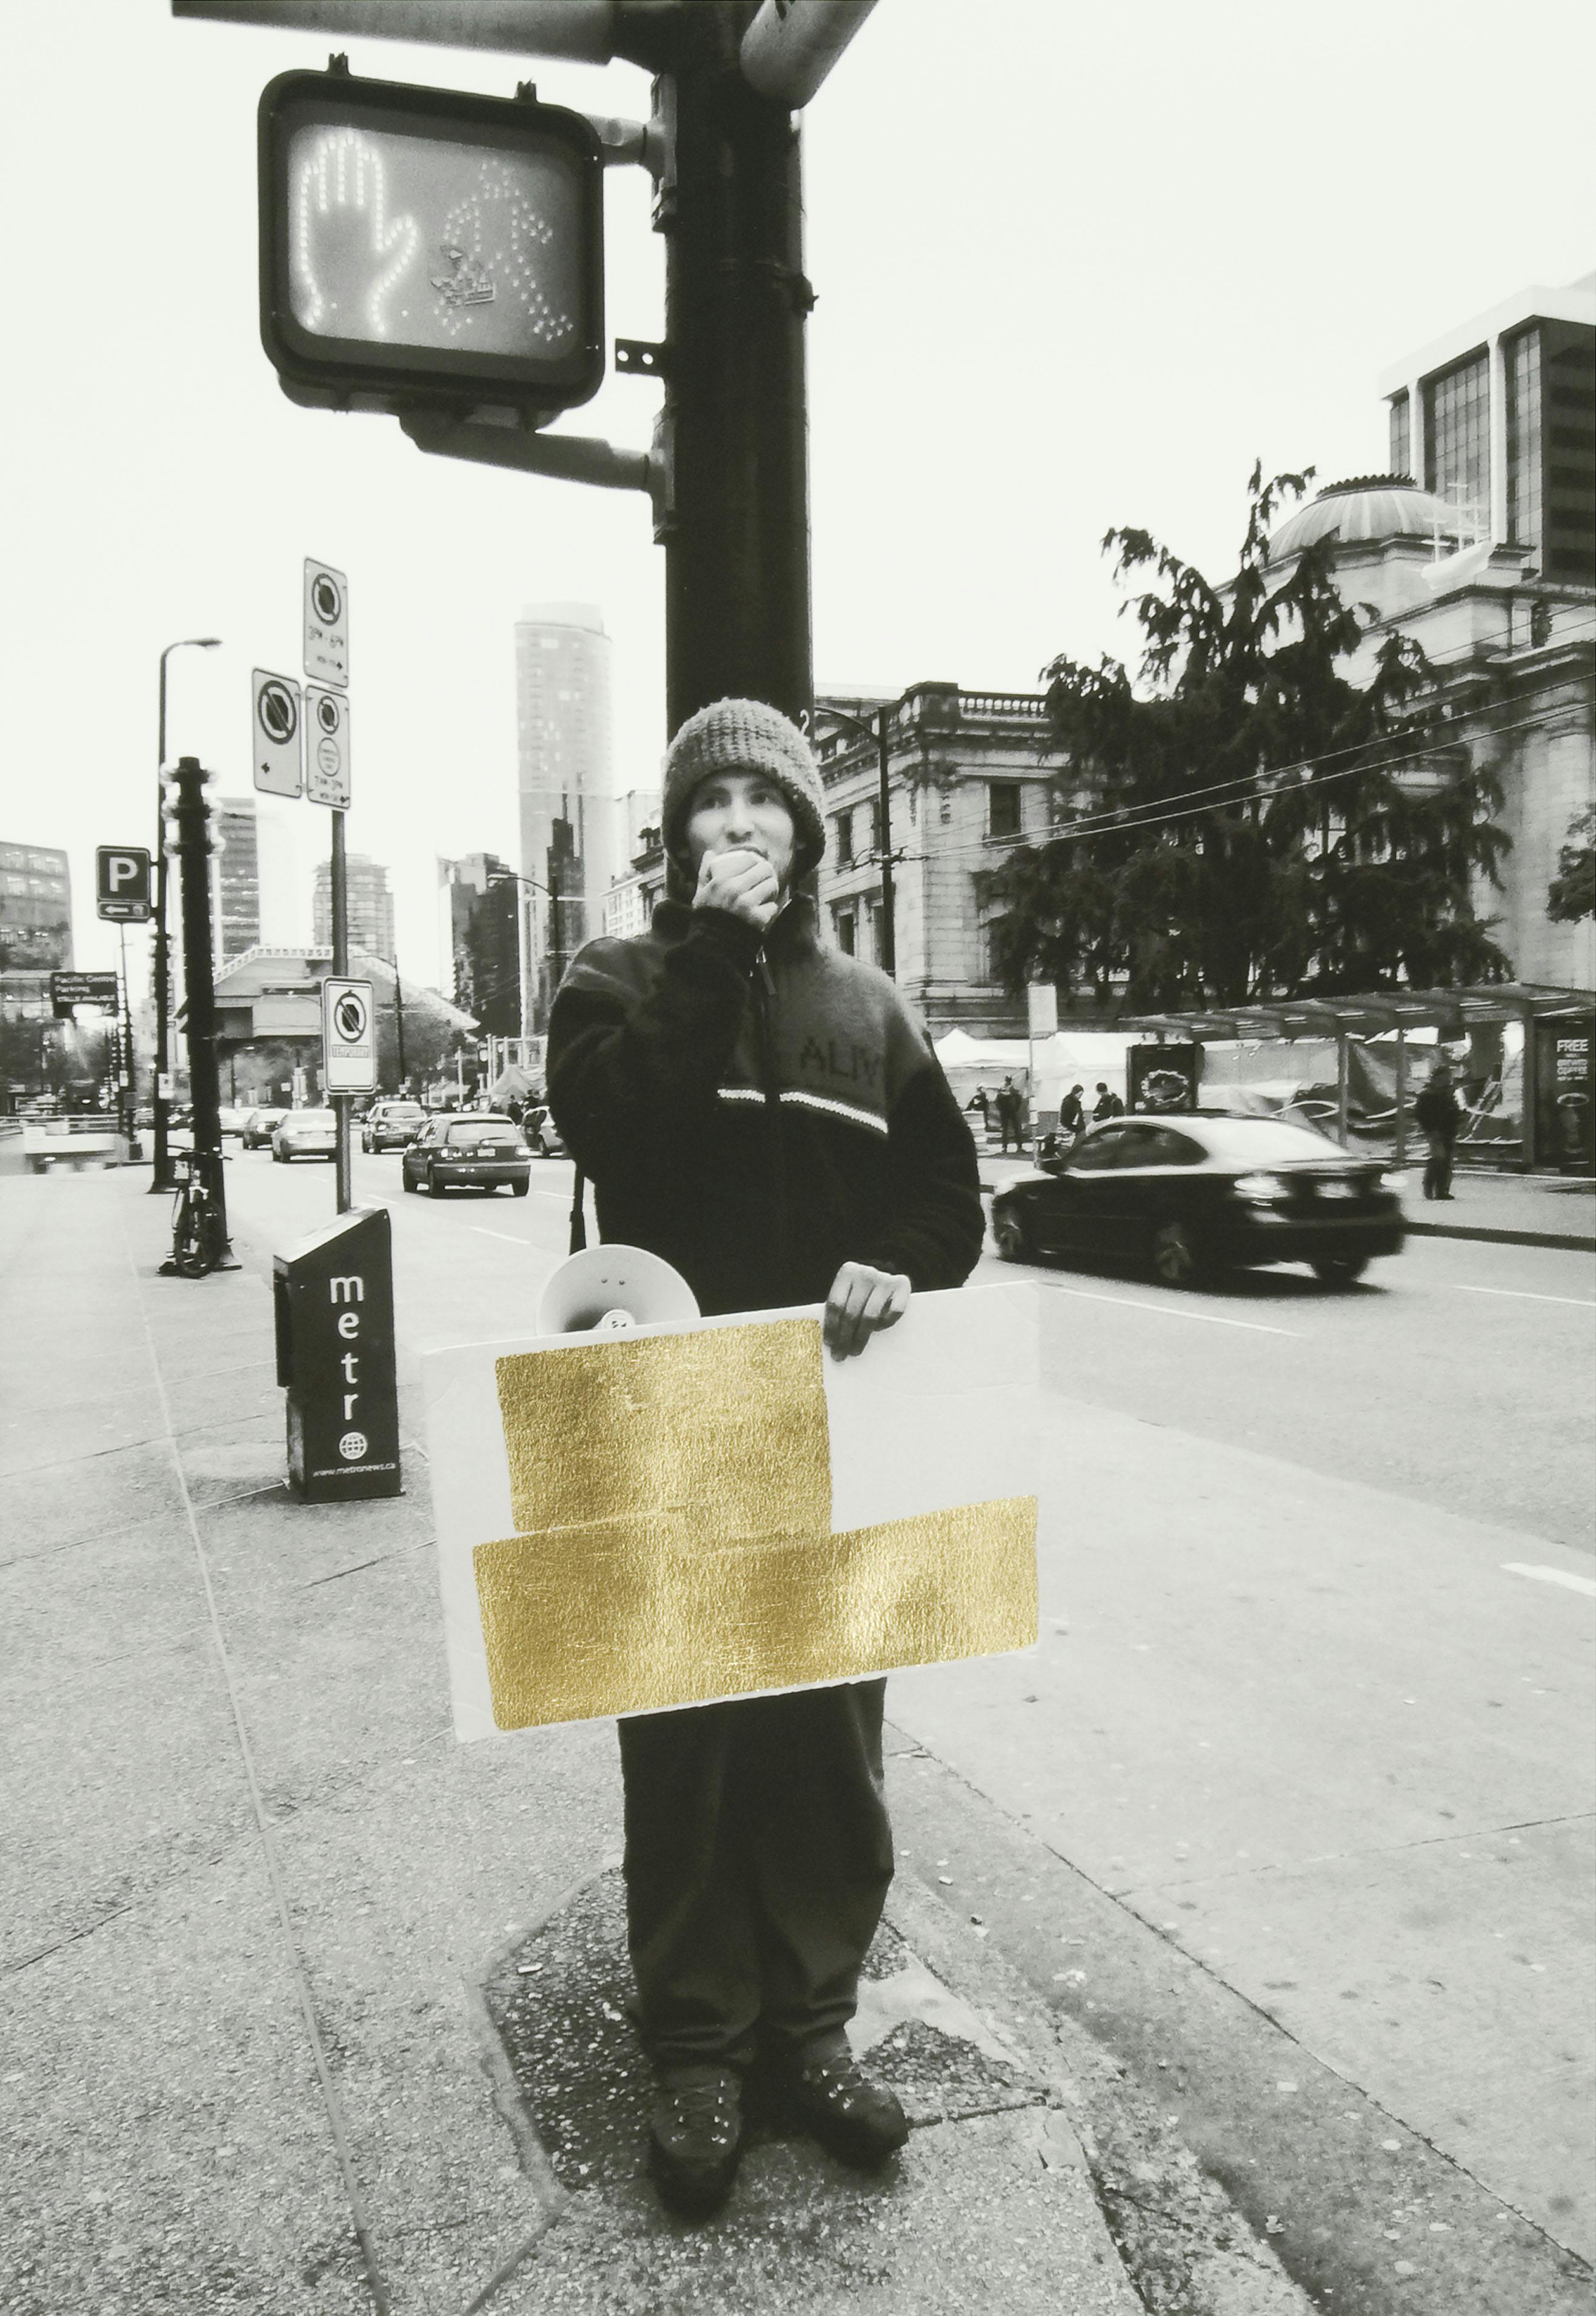 A black and white photograph of a person standing by a traffic light pole on a city street corner. They have a megaphone and are carrying a sign covered by a gold leaf intervention over the image.